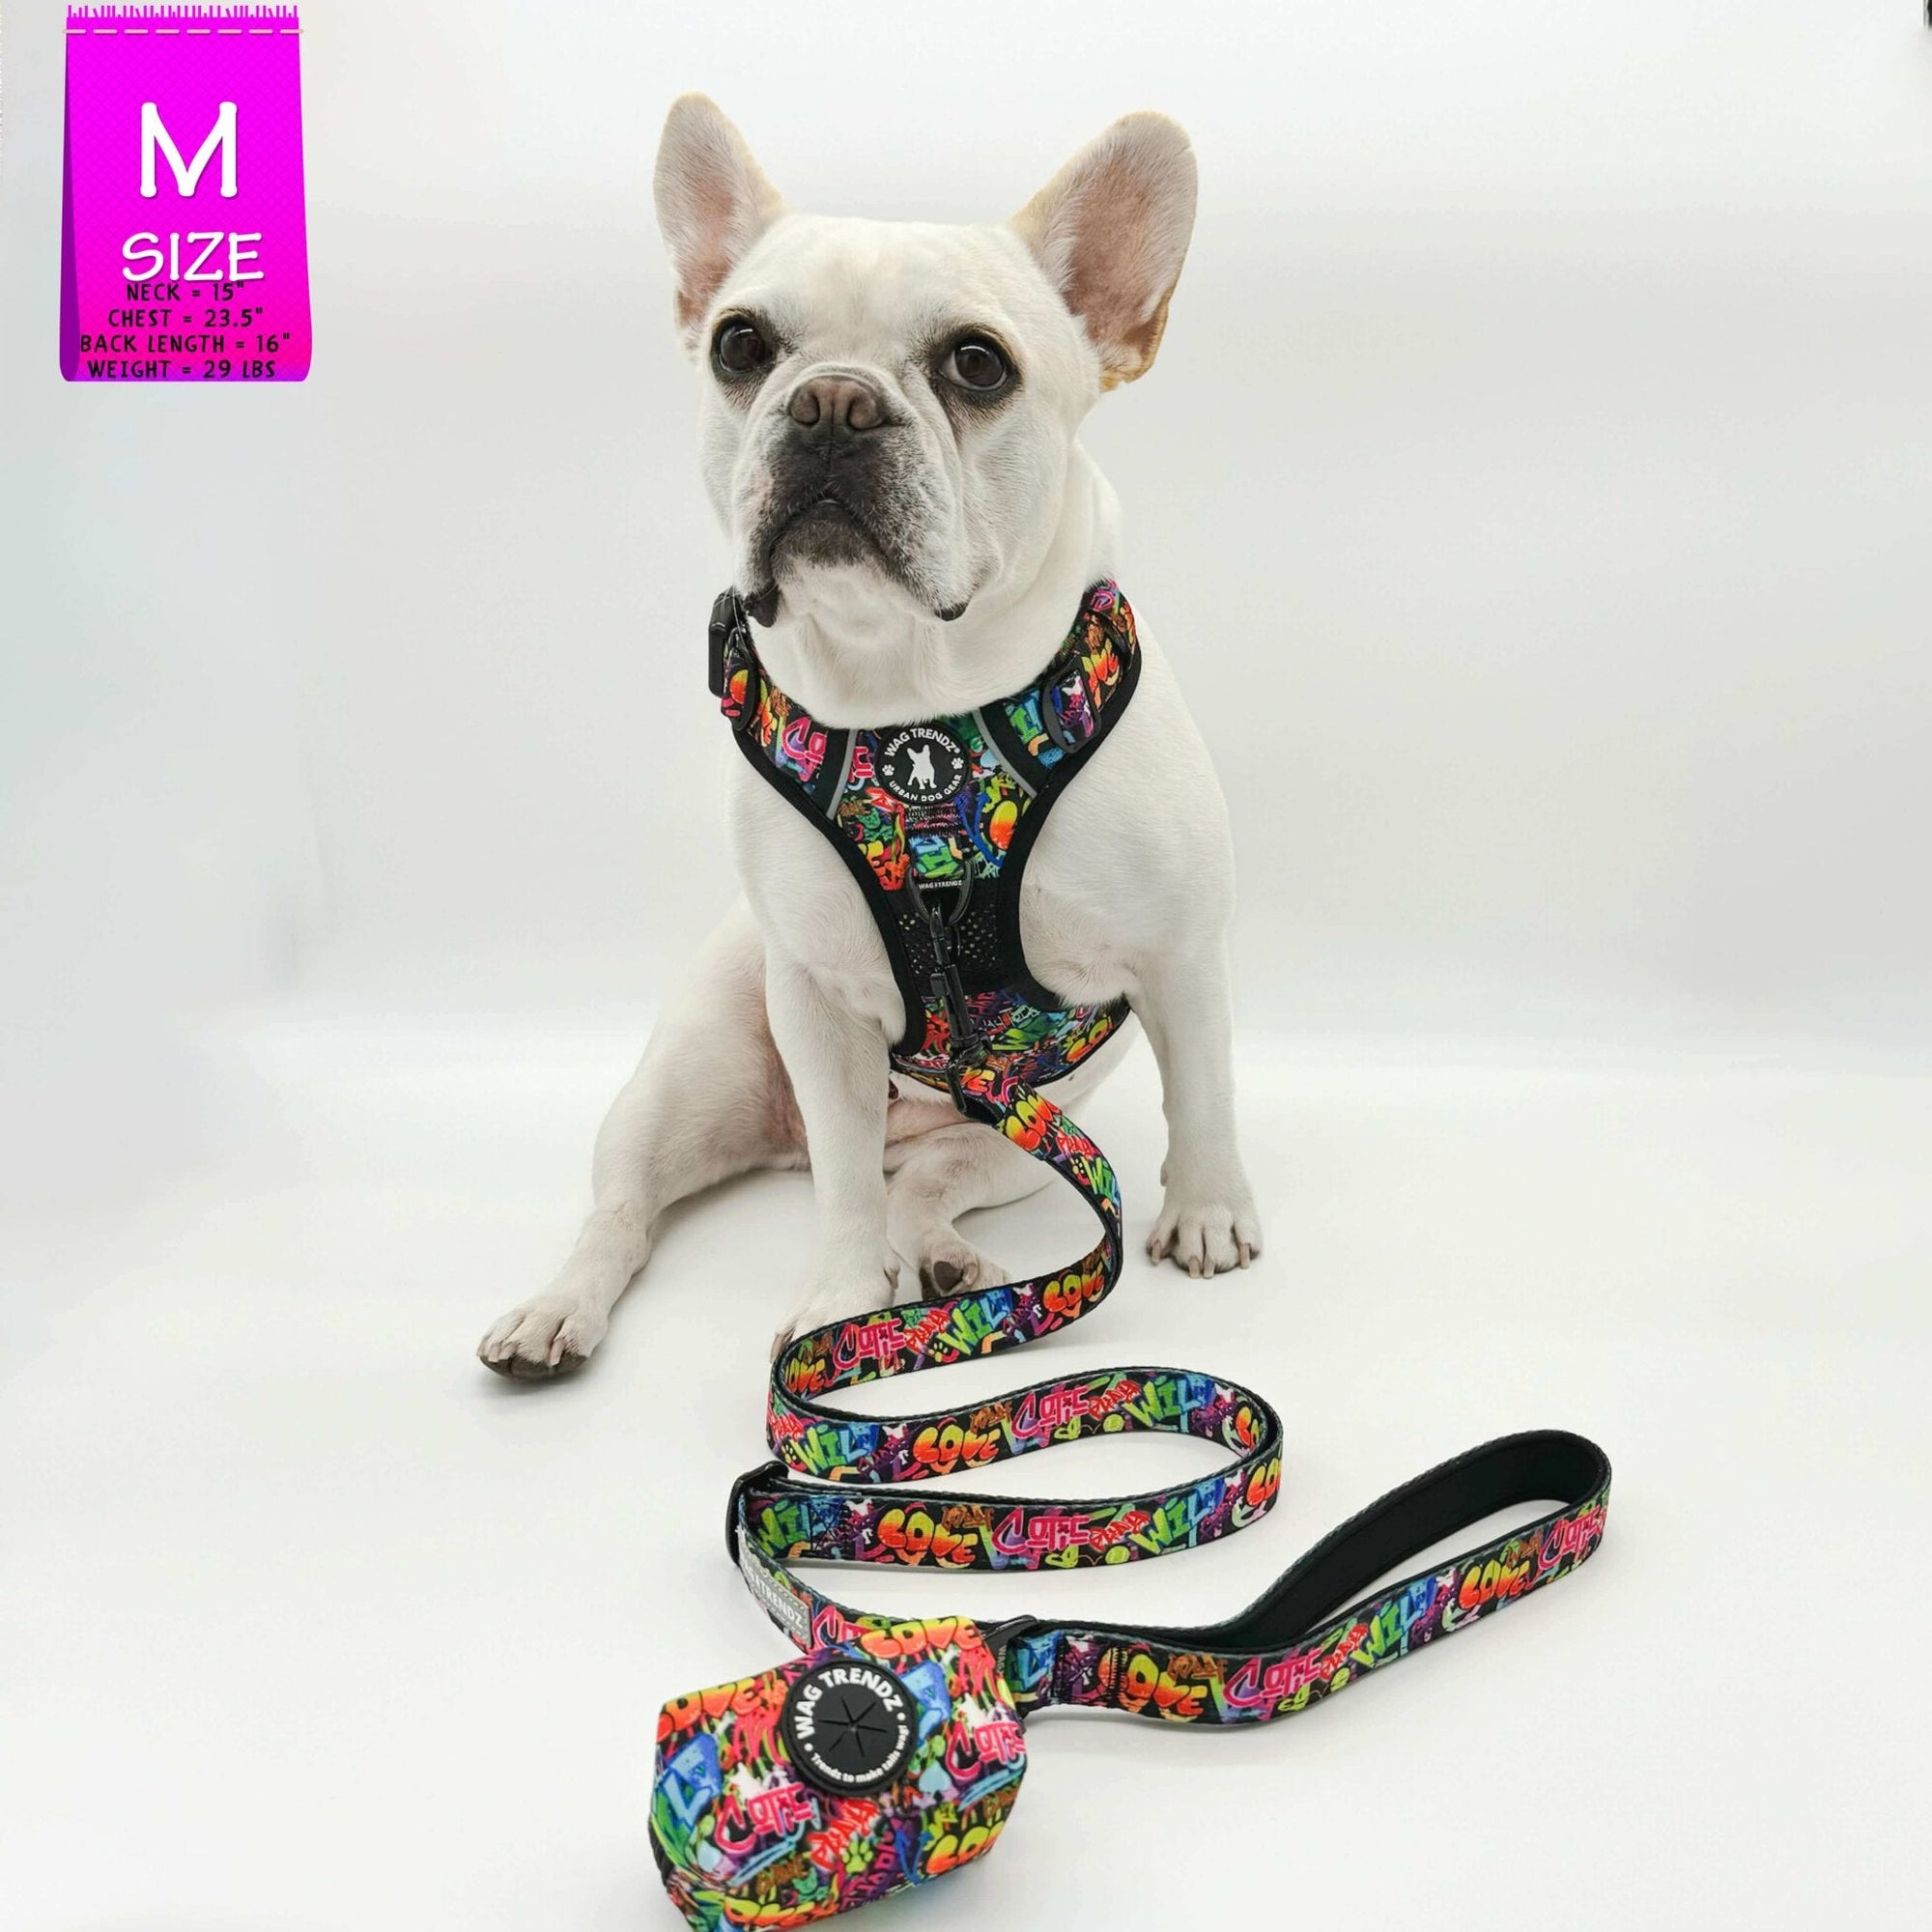 Dog Harness and Leash Set - French Bulldog wearing a medium no pull dog harness with handle  - multi colored Street Graffiti - with matching adjustable leash and poop bag holder - against solid white background - Wag Trendz